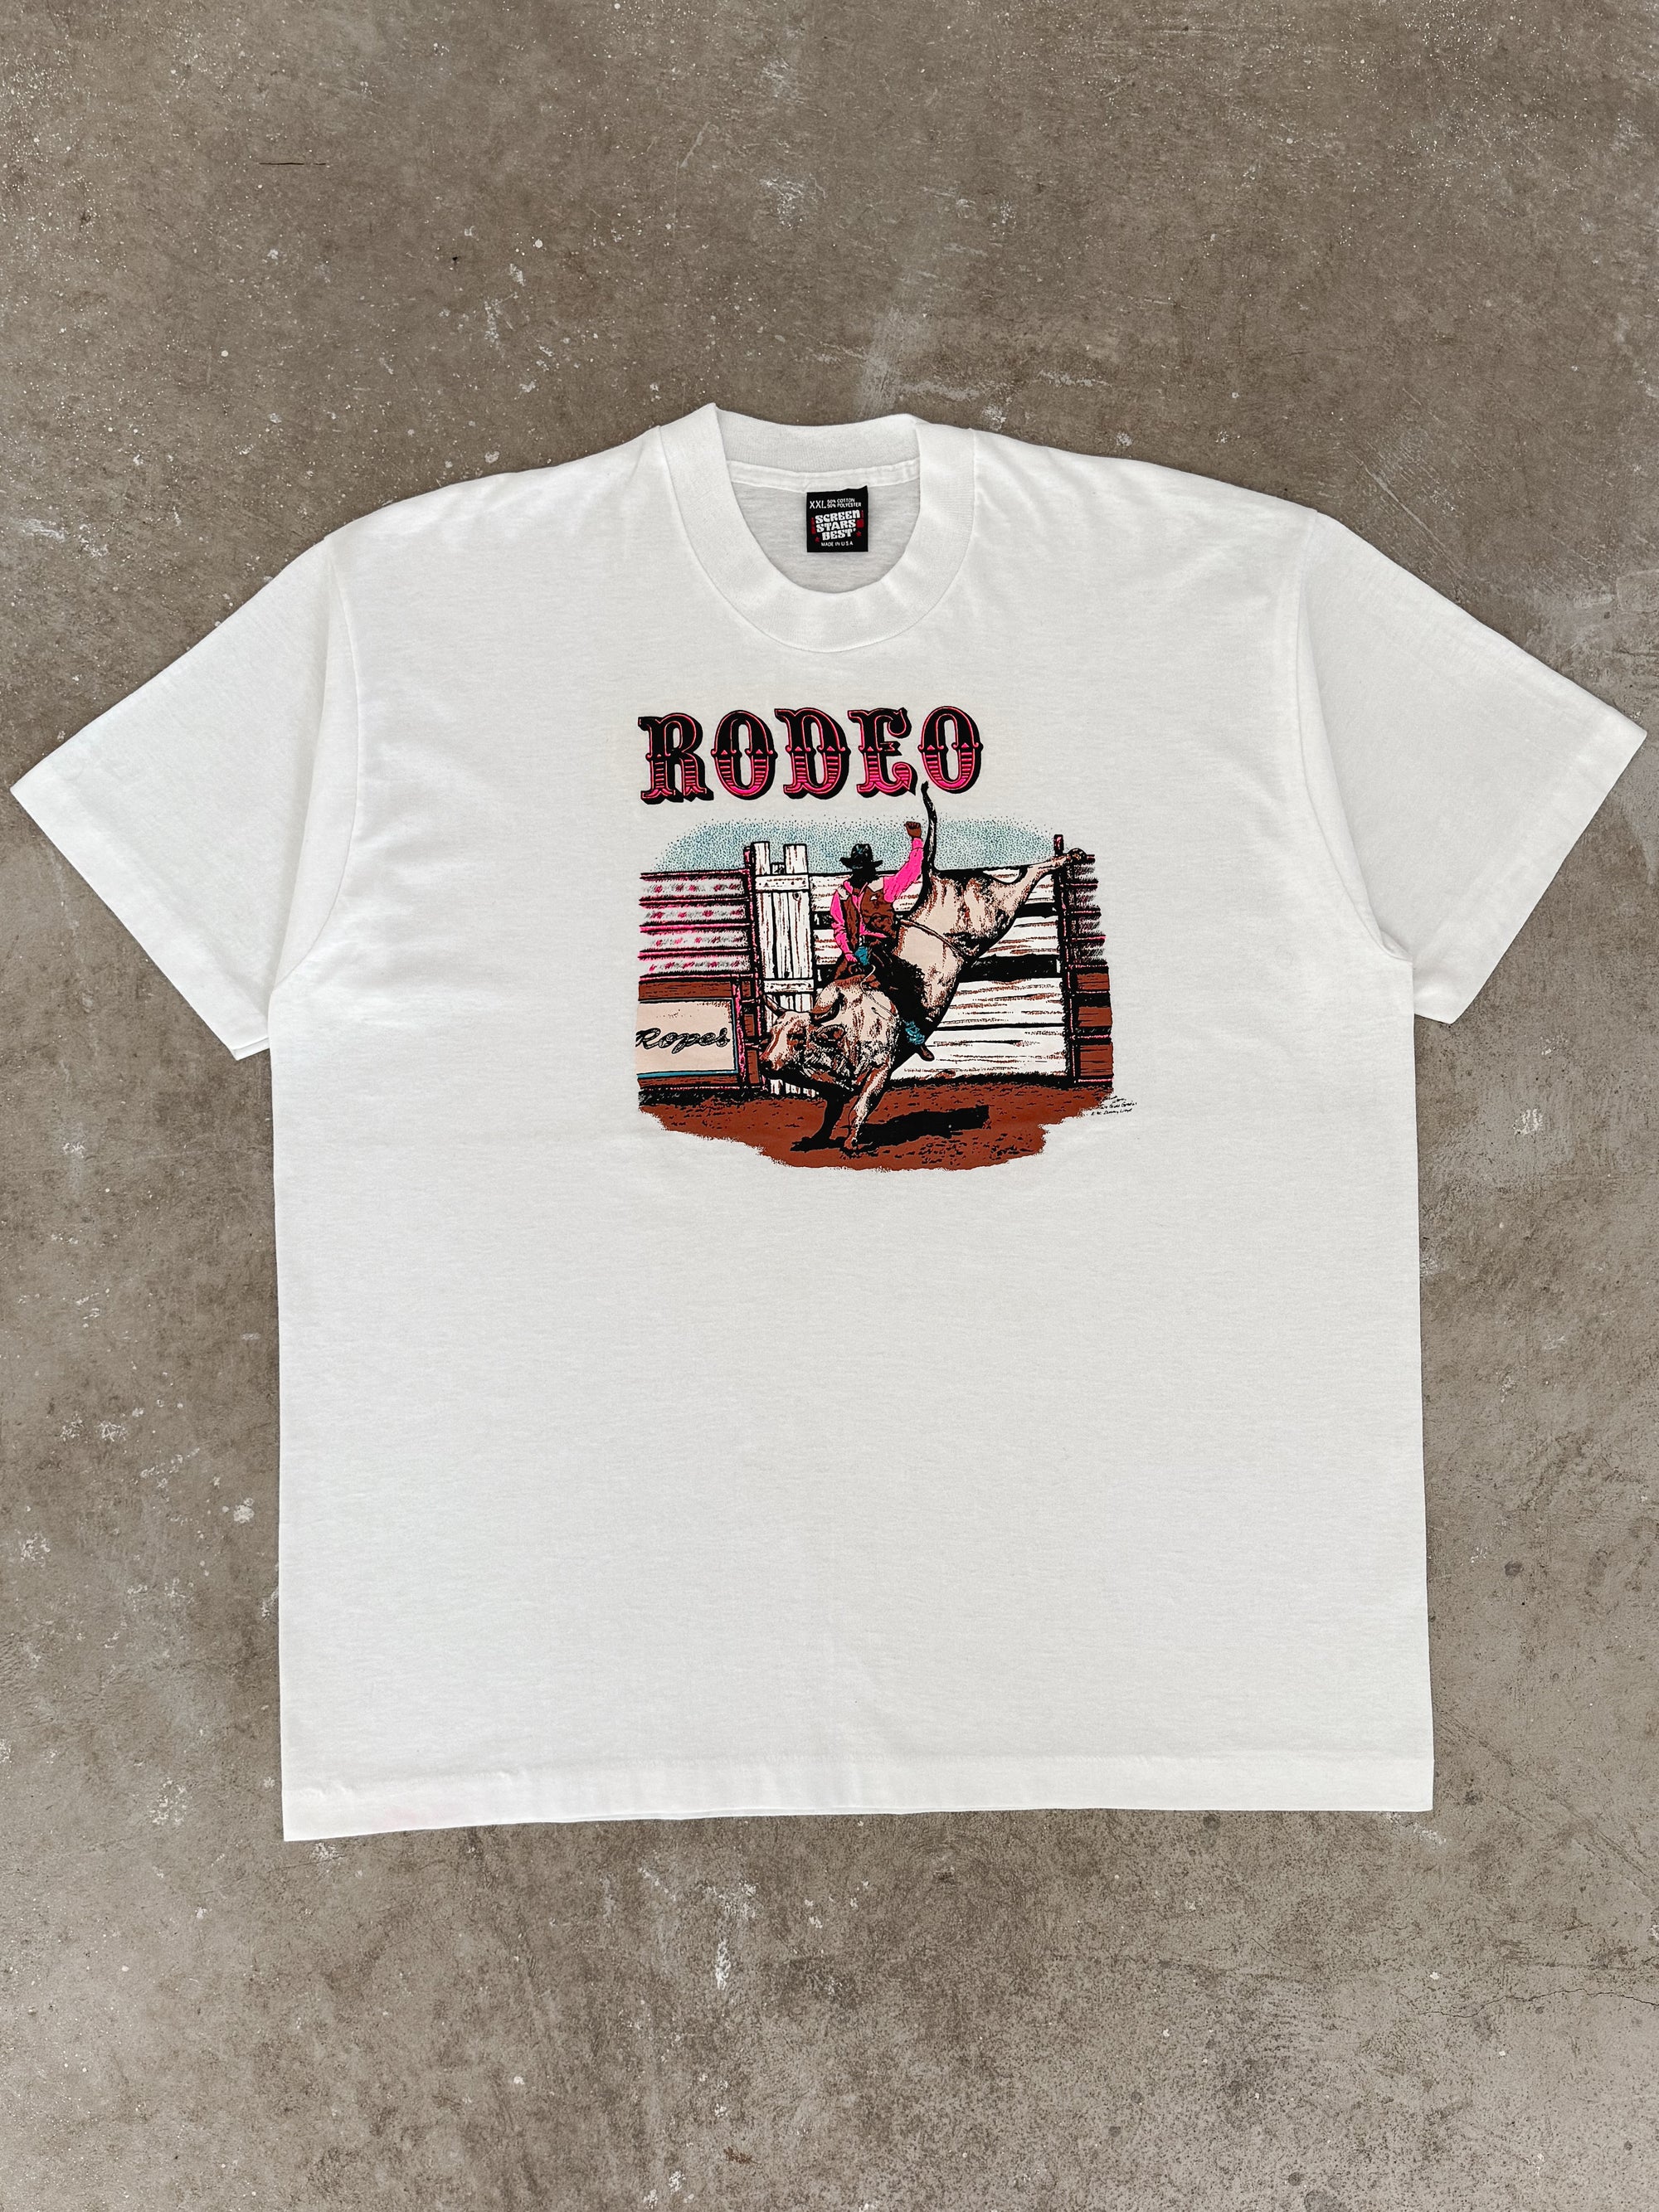 1980s/90s "Rodeo" Tee (XL)